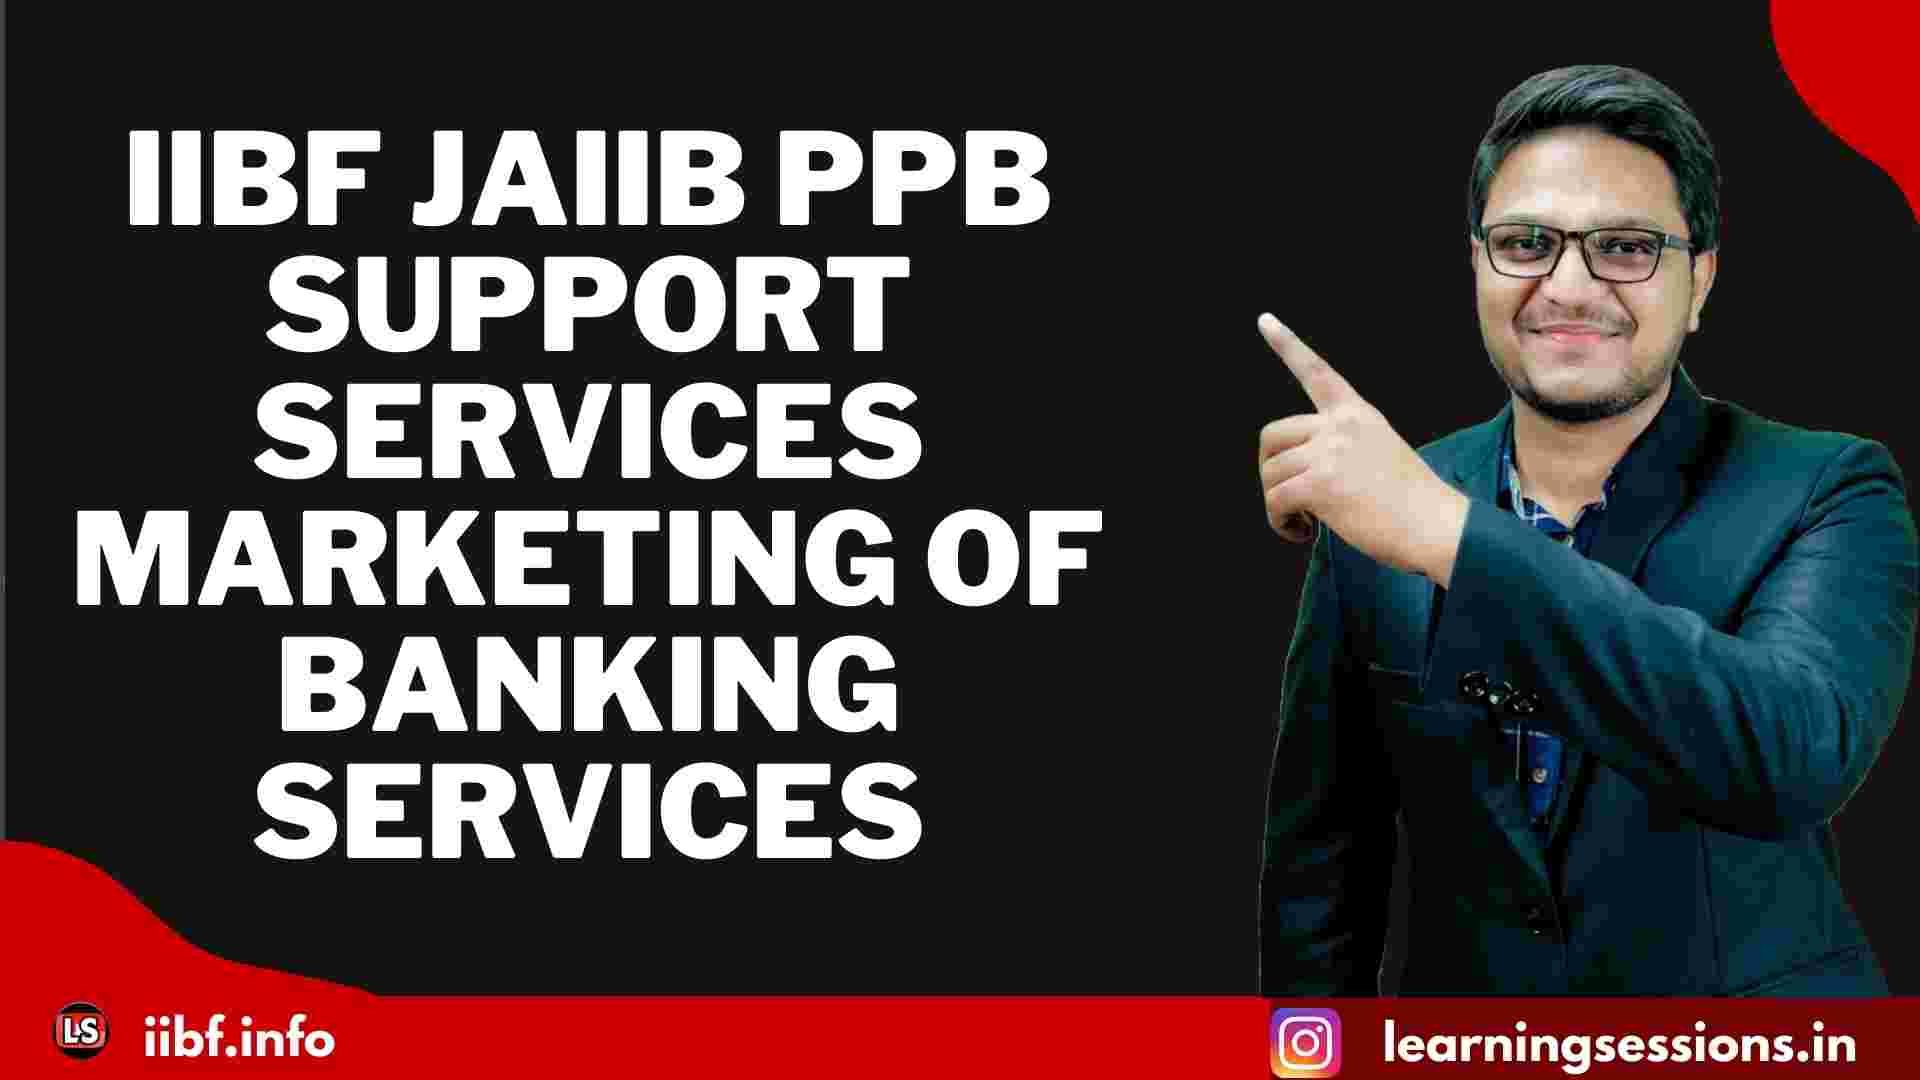 IIBF JAIIB PPB SUPPORT SERVICES - MARKETING OF BANKING SERVICES